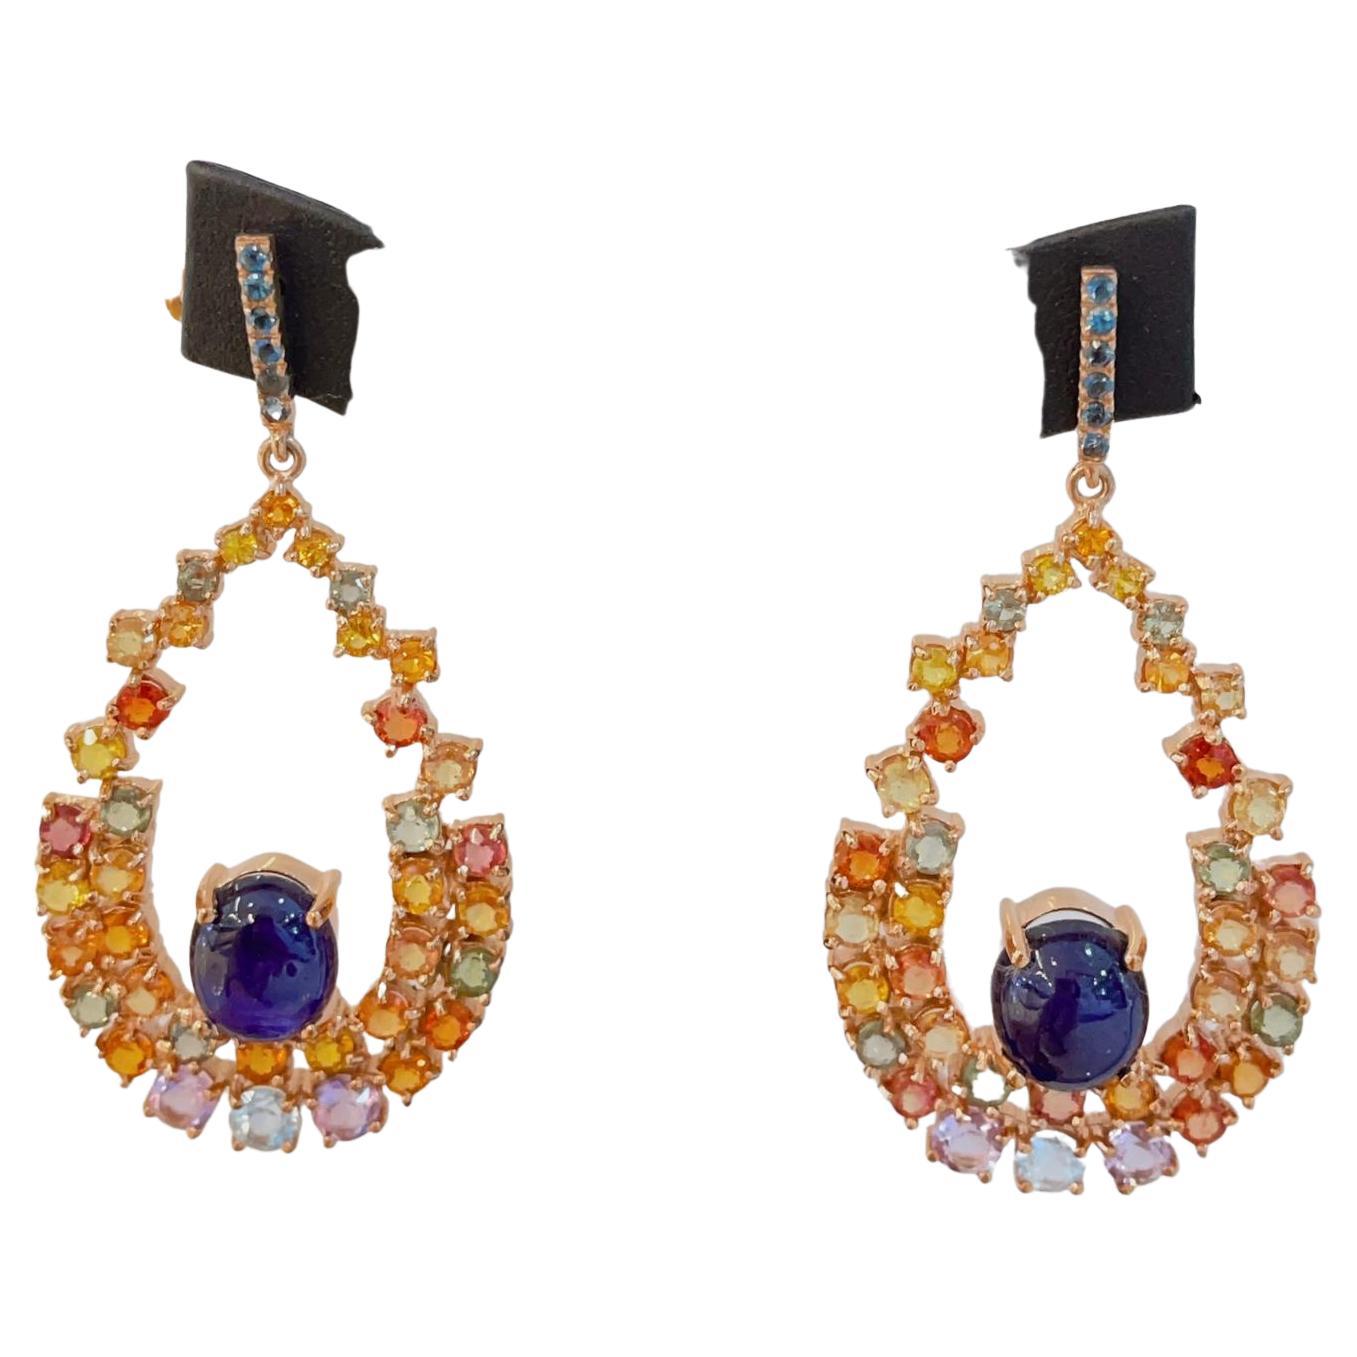 Bochic “Capri” Blue Sapphire & Fancy Multi Sapphires Earrings Set In 22K Gold & Silver 
Natural Blue Sapphire Cabochons - 17.89 Carats 
From Sri Lanka 
Royal Deep Blue Color 
Natural Fancy Multi Color Sapphires  - 20.15 Carats 
Round brilliant